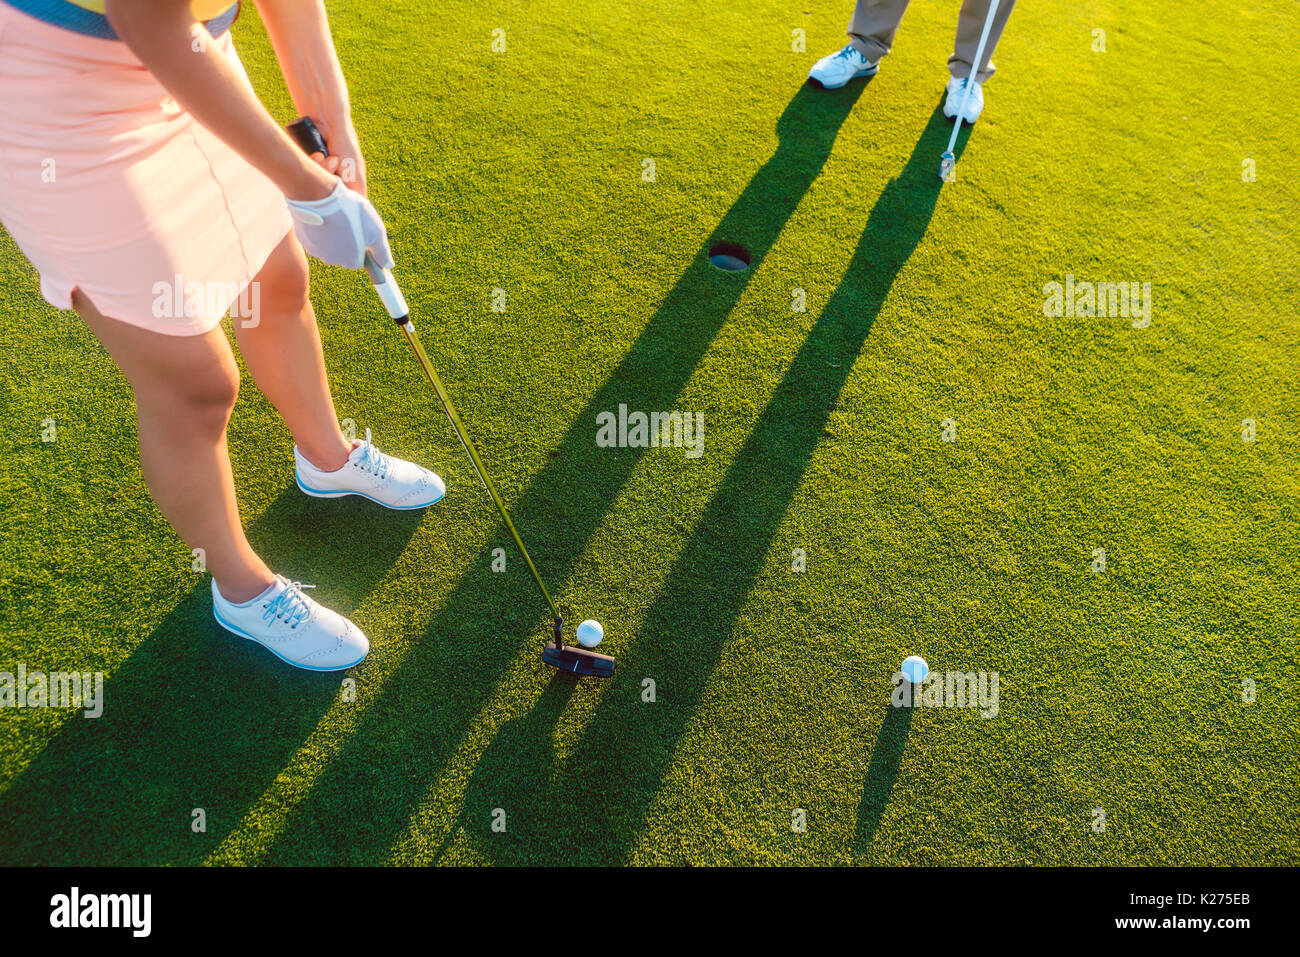 woman player ready to hit the ball into the hole at the end of a Stock Photo